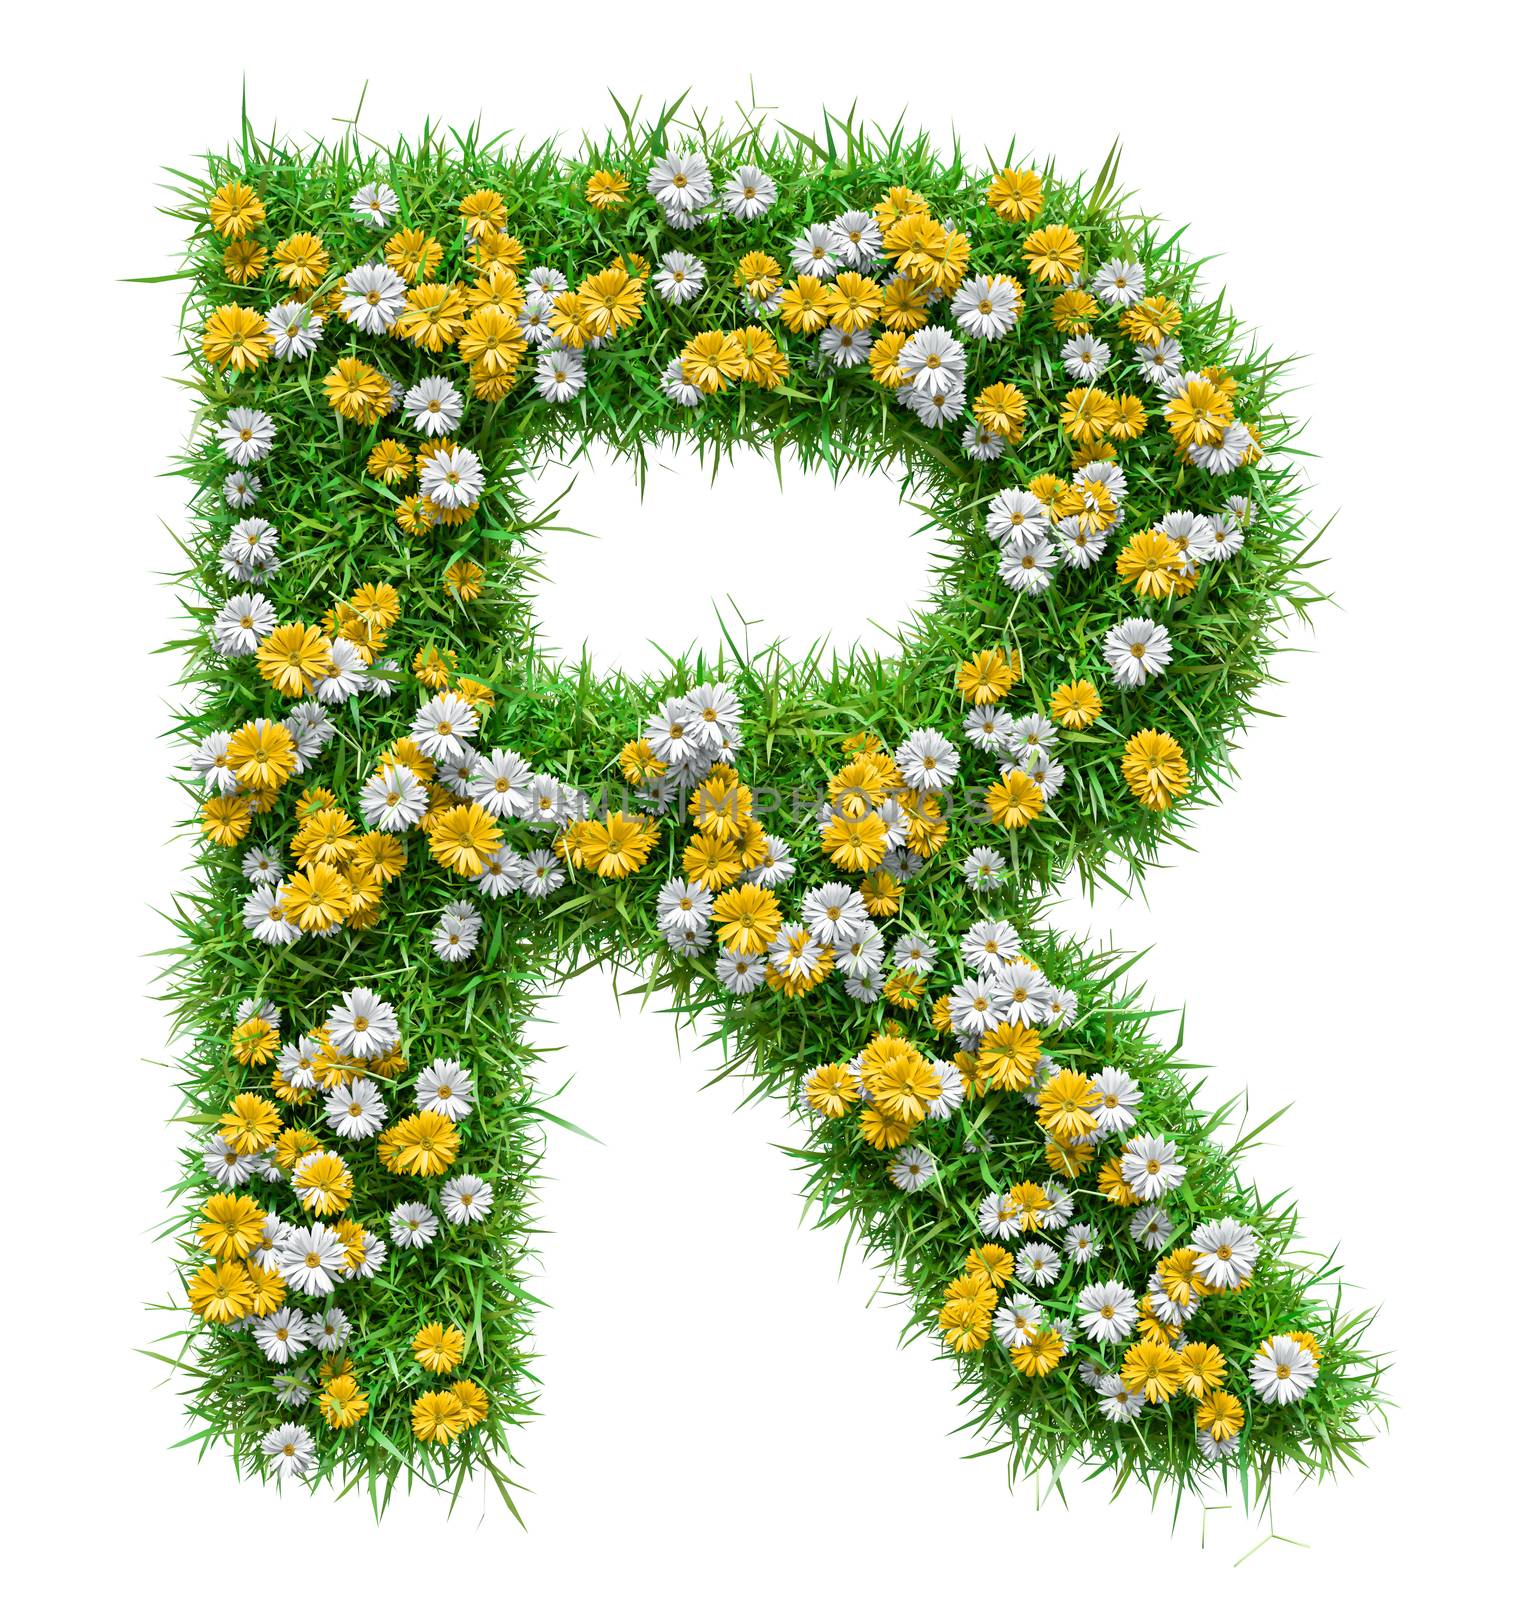 Letter R Of Green Grass And Flowers. Isolated On White Background. Font For Your Design. 3D Illustration